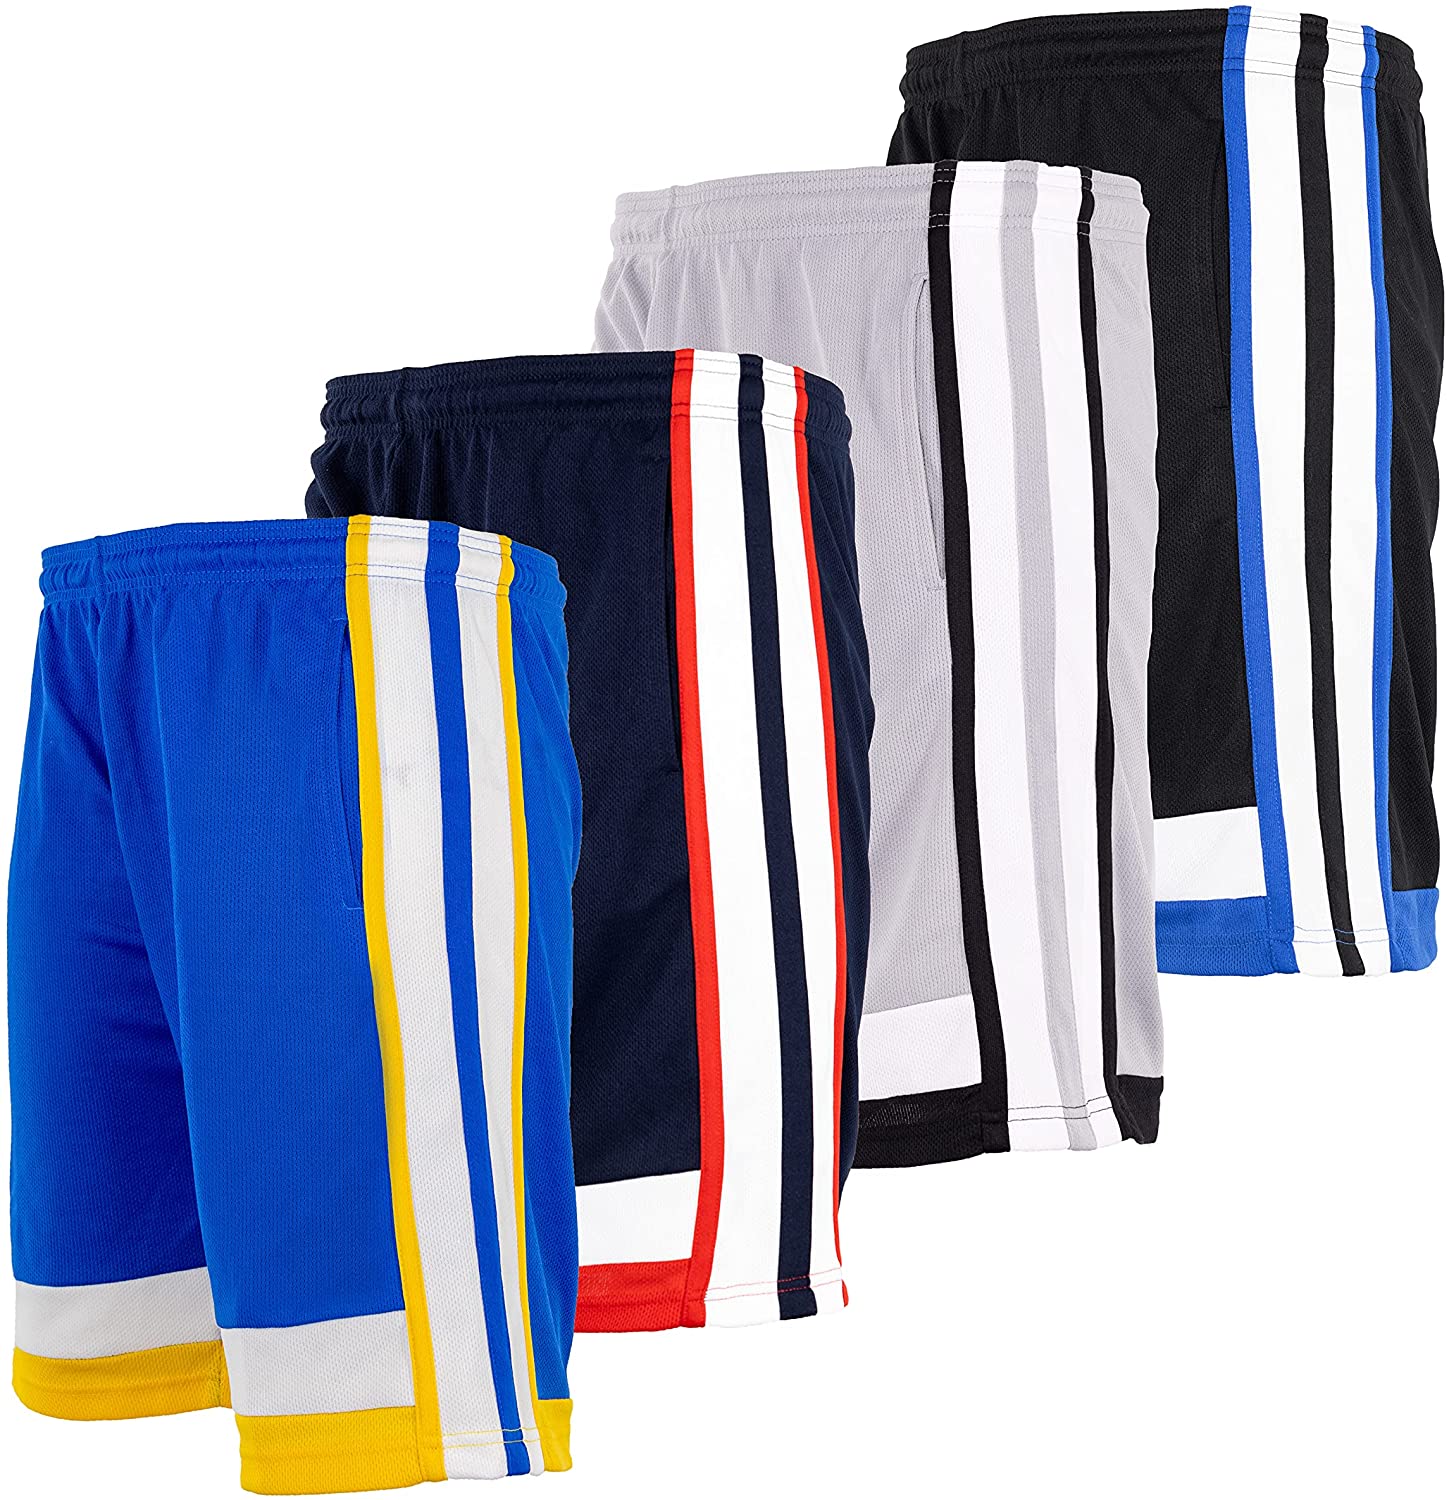 Fitness Sports Athletic Performance High Energy Long Basketball Shorts for Men and Exercise 4 Pack 